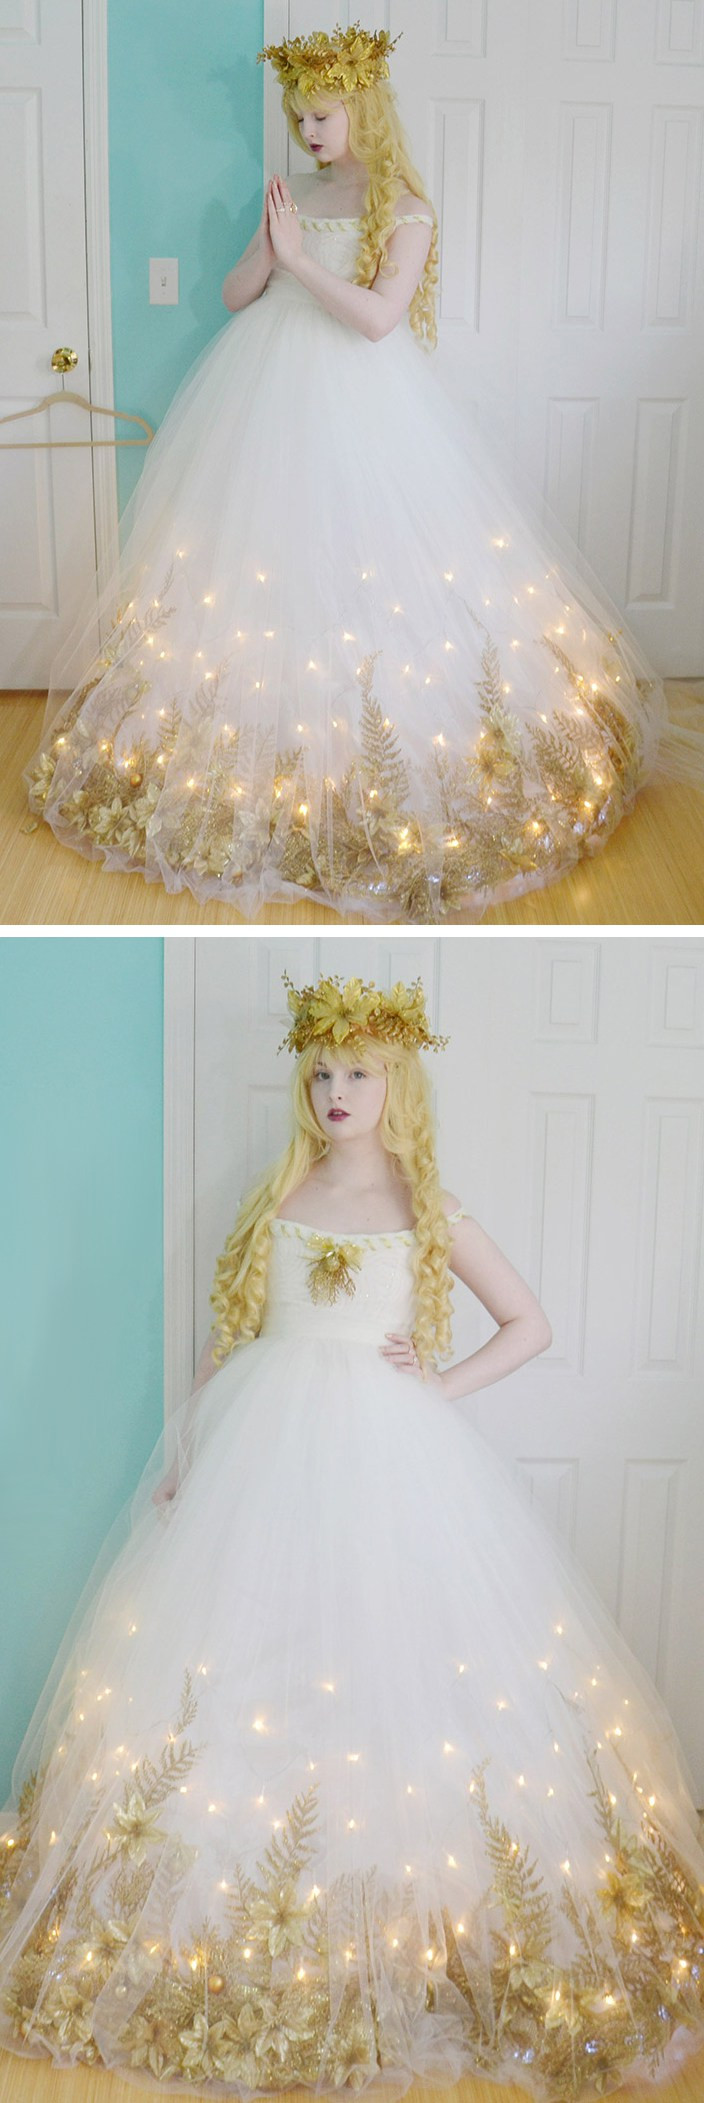 DIY Fairy Costume
 The 15 Best DIY Halloween Costumes for Adults